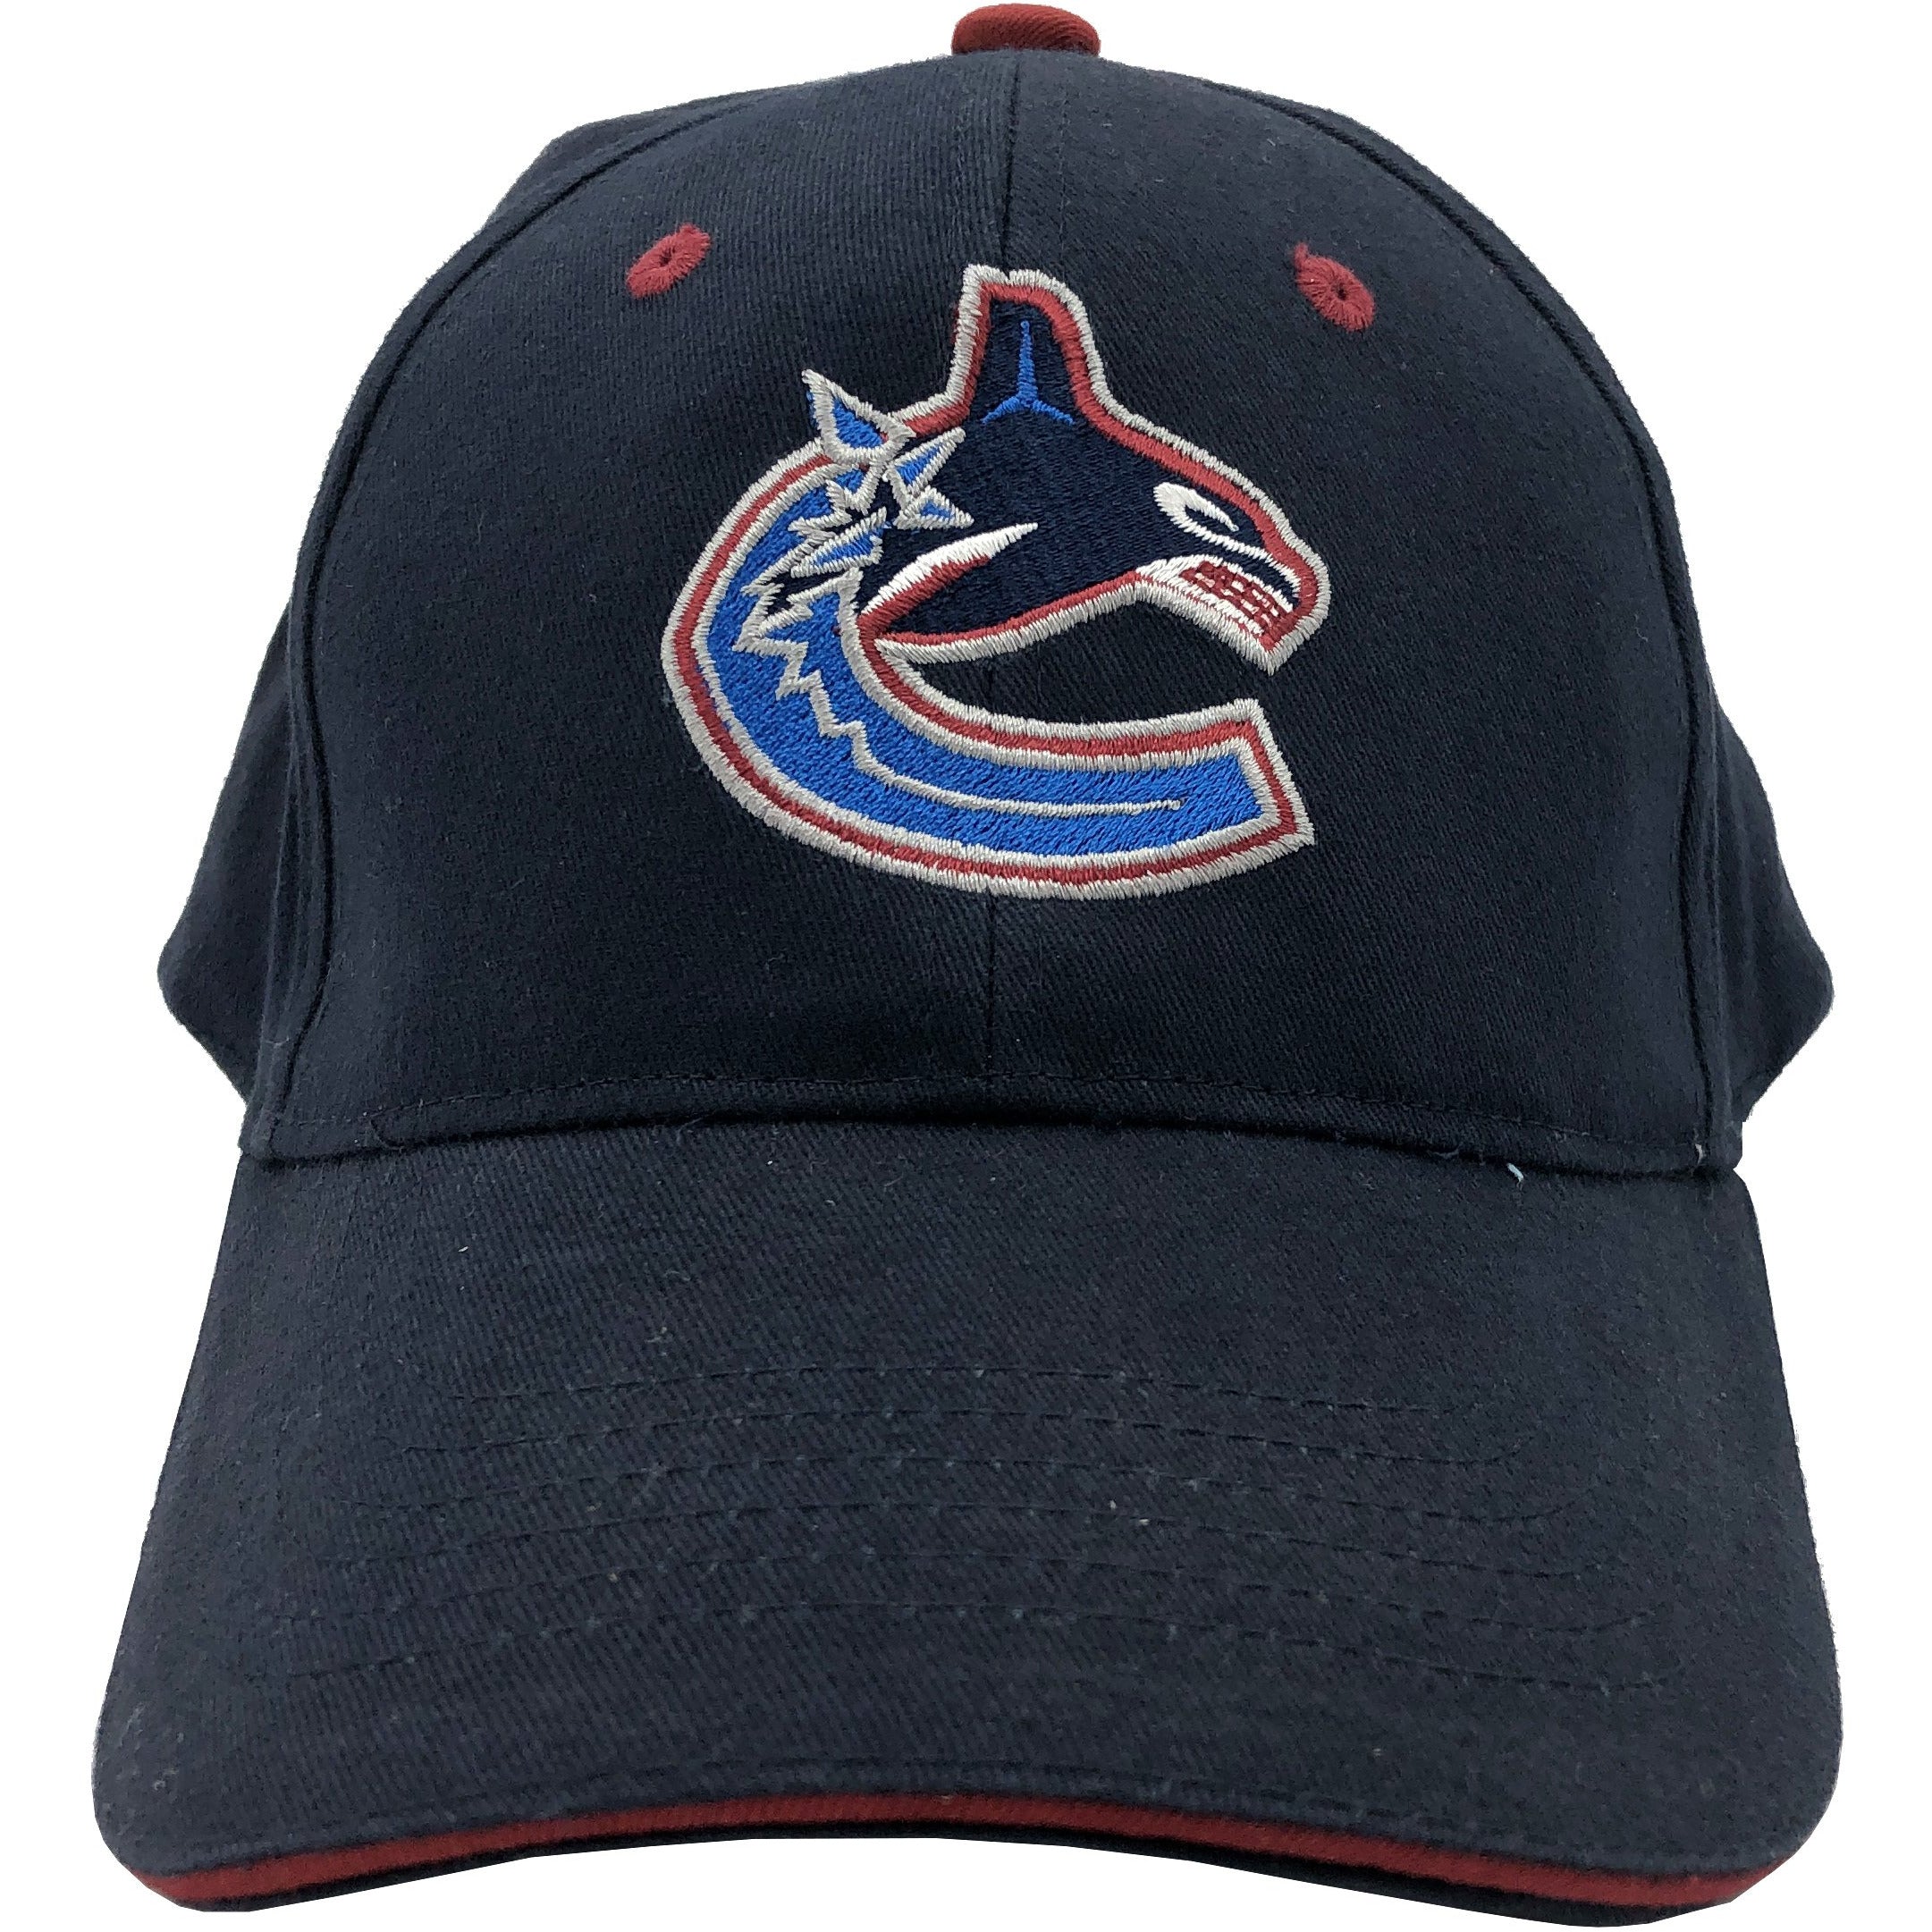 Official NHL Ball Caps / One Size Fits All / NHL Branded Caps / Late 90's – Mid 2000's